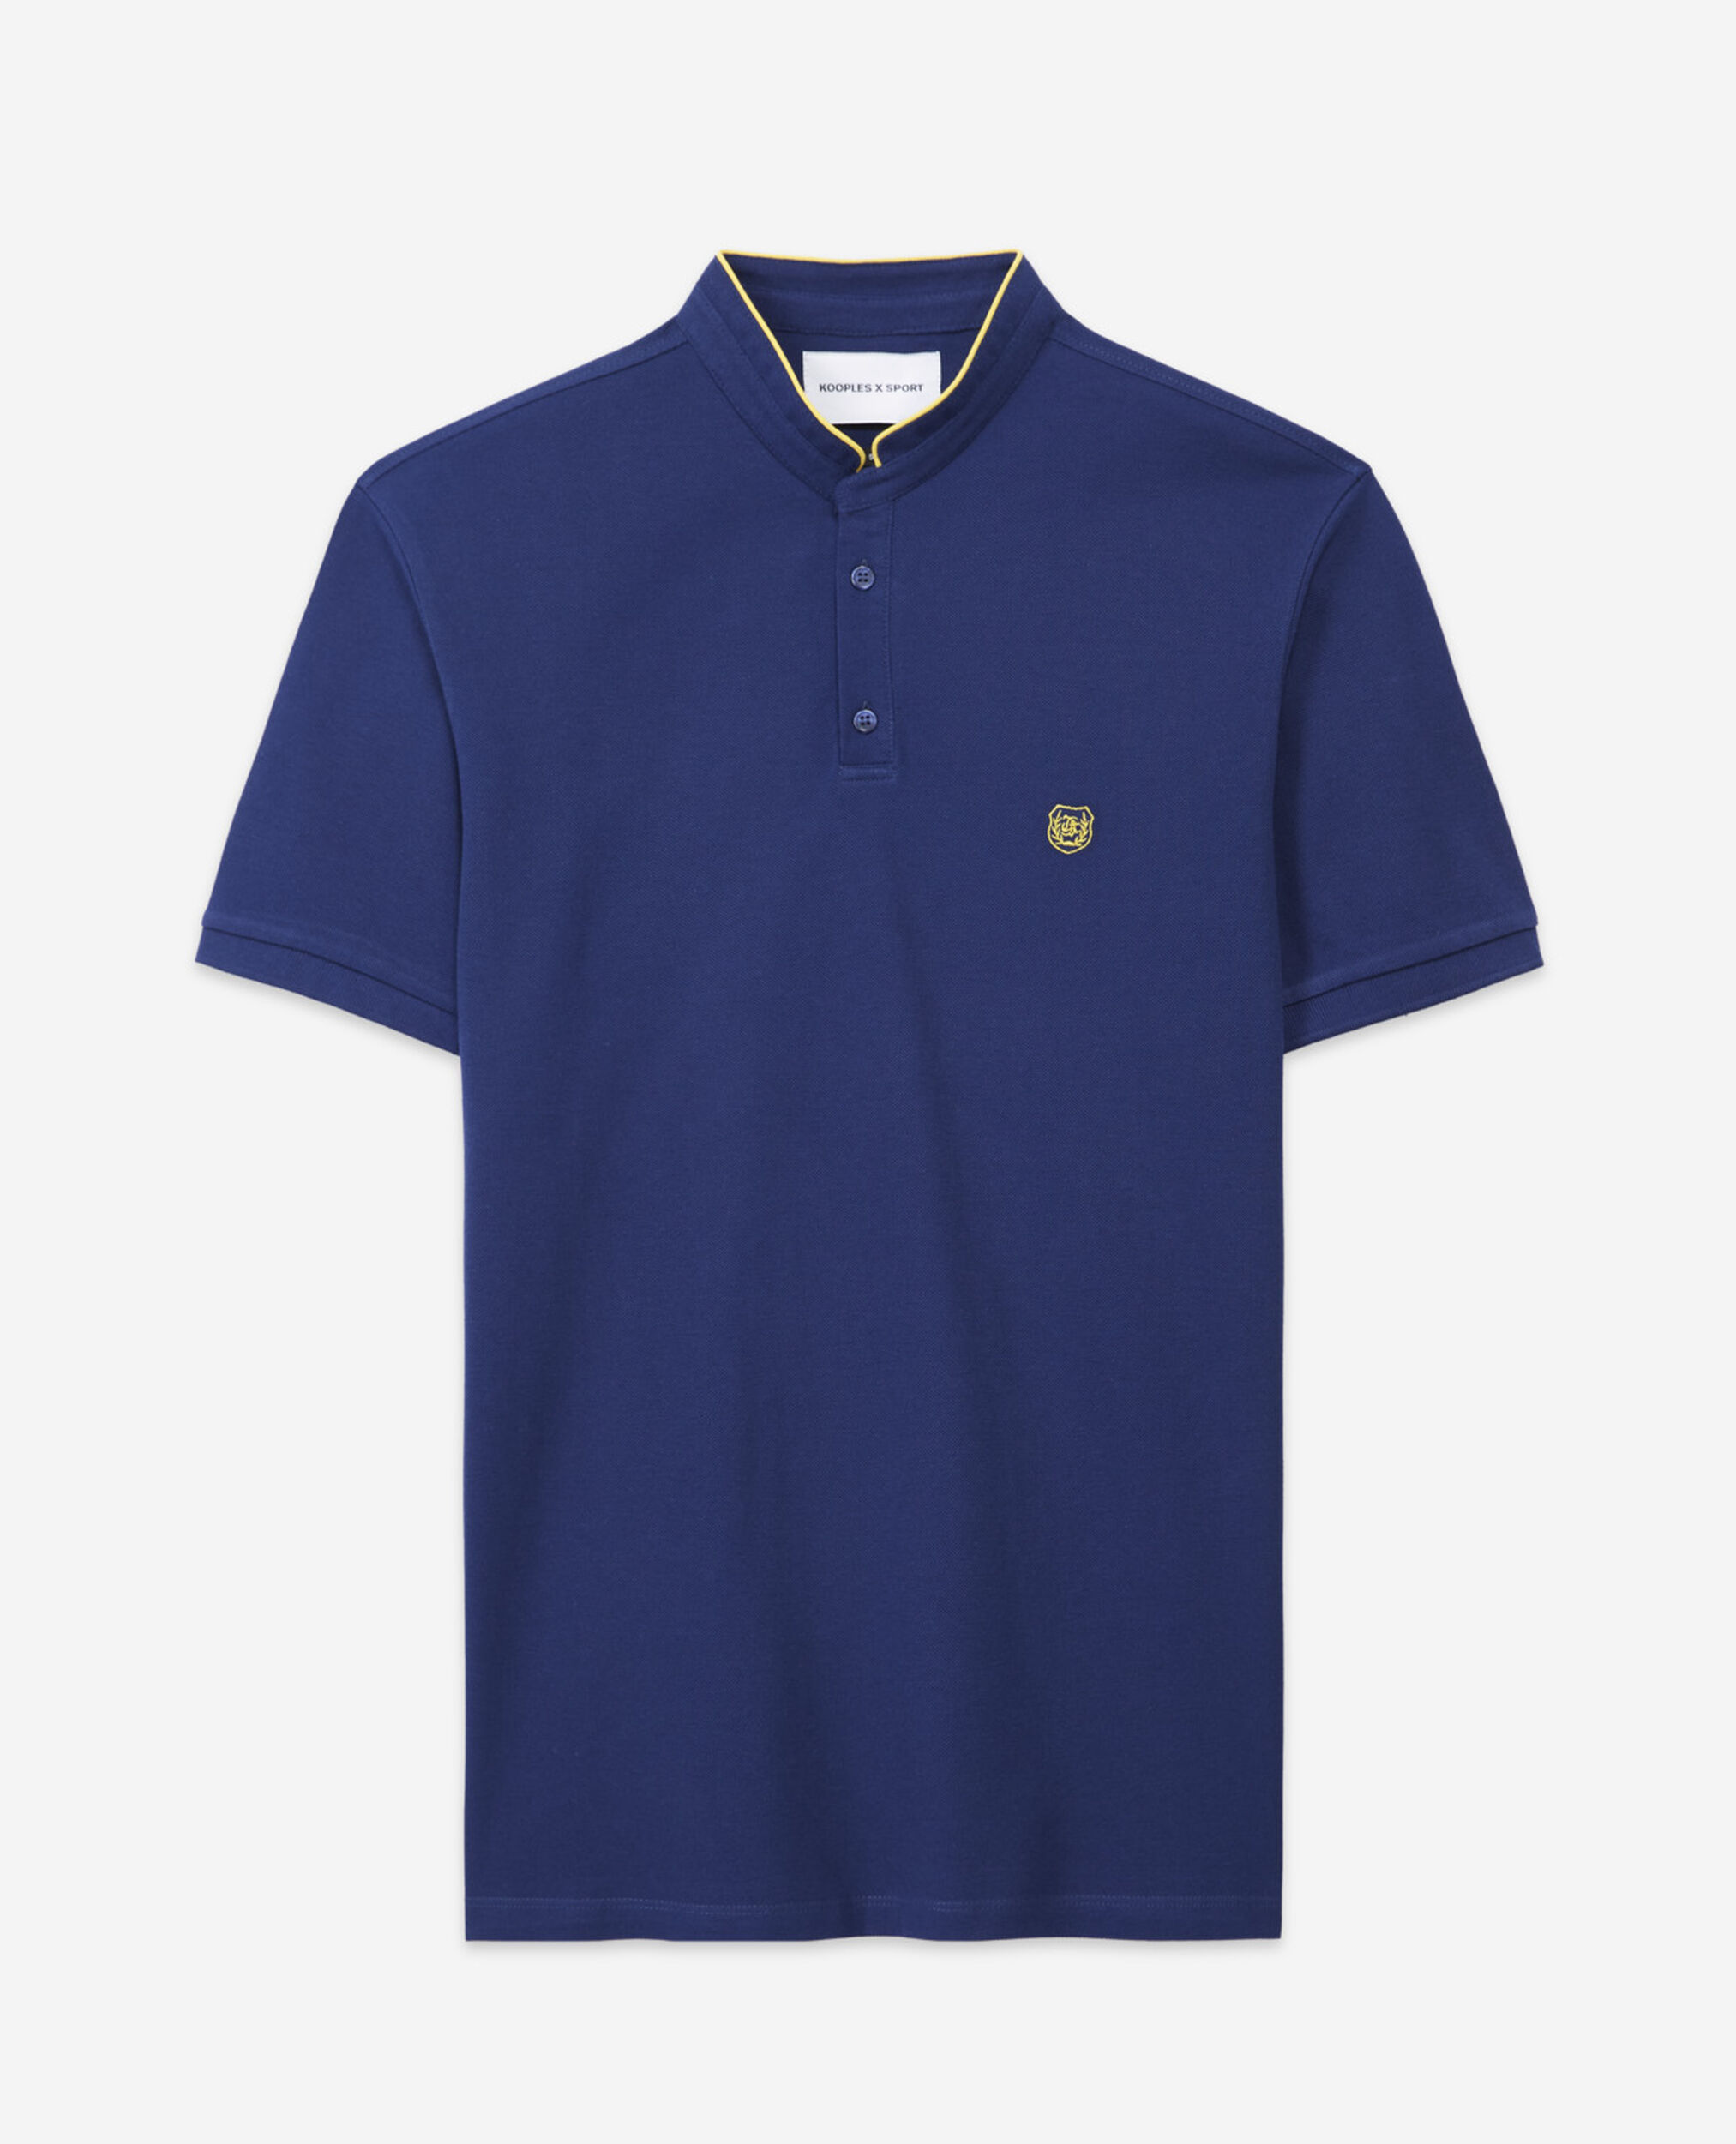 Camisa polo jersey azul marino detalles, OFFICER NVY/DANDELION YLW, hi-res image number null